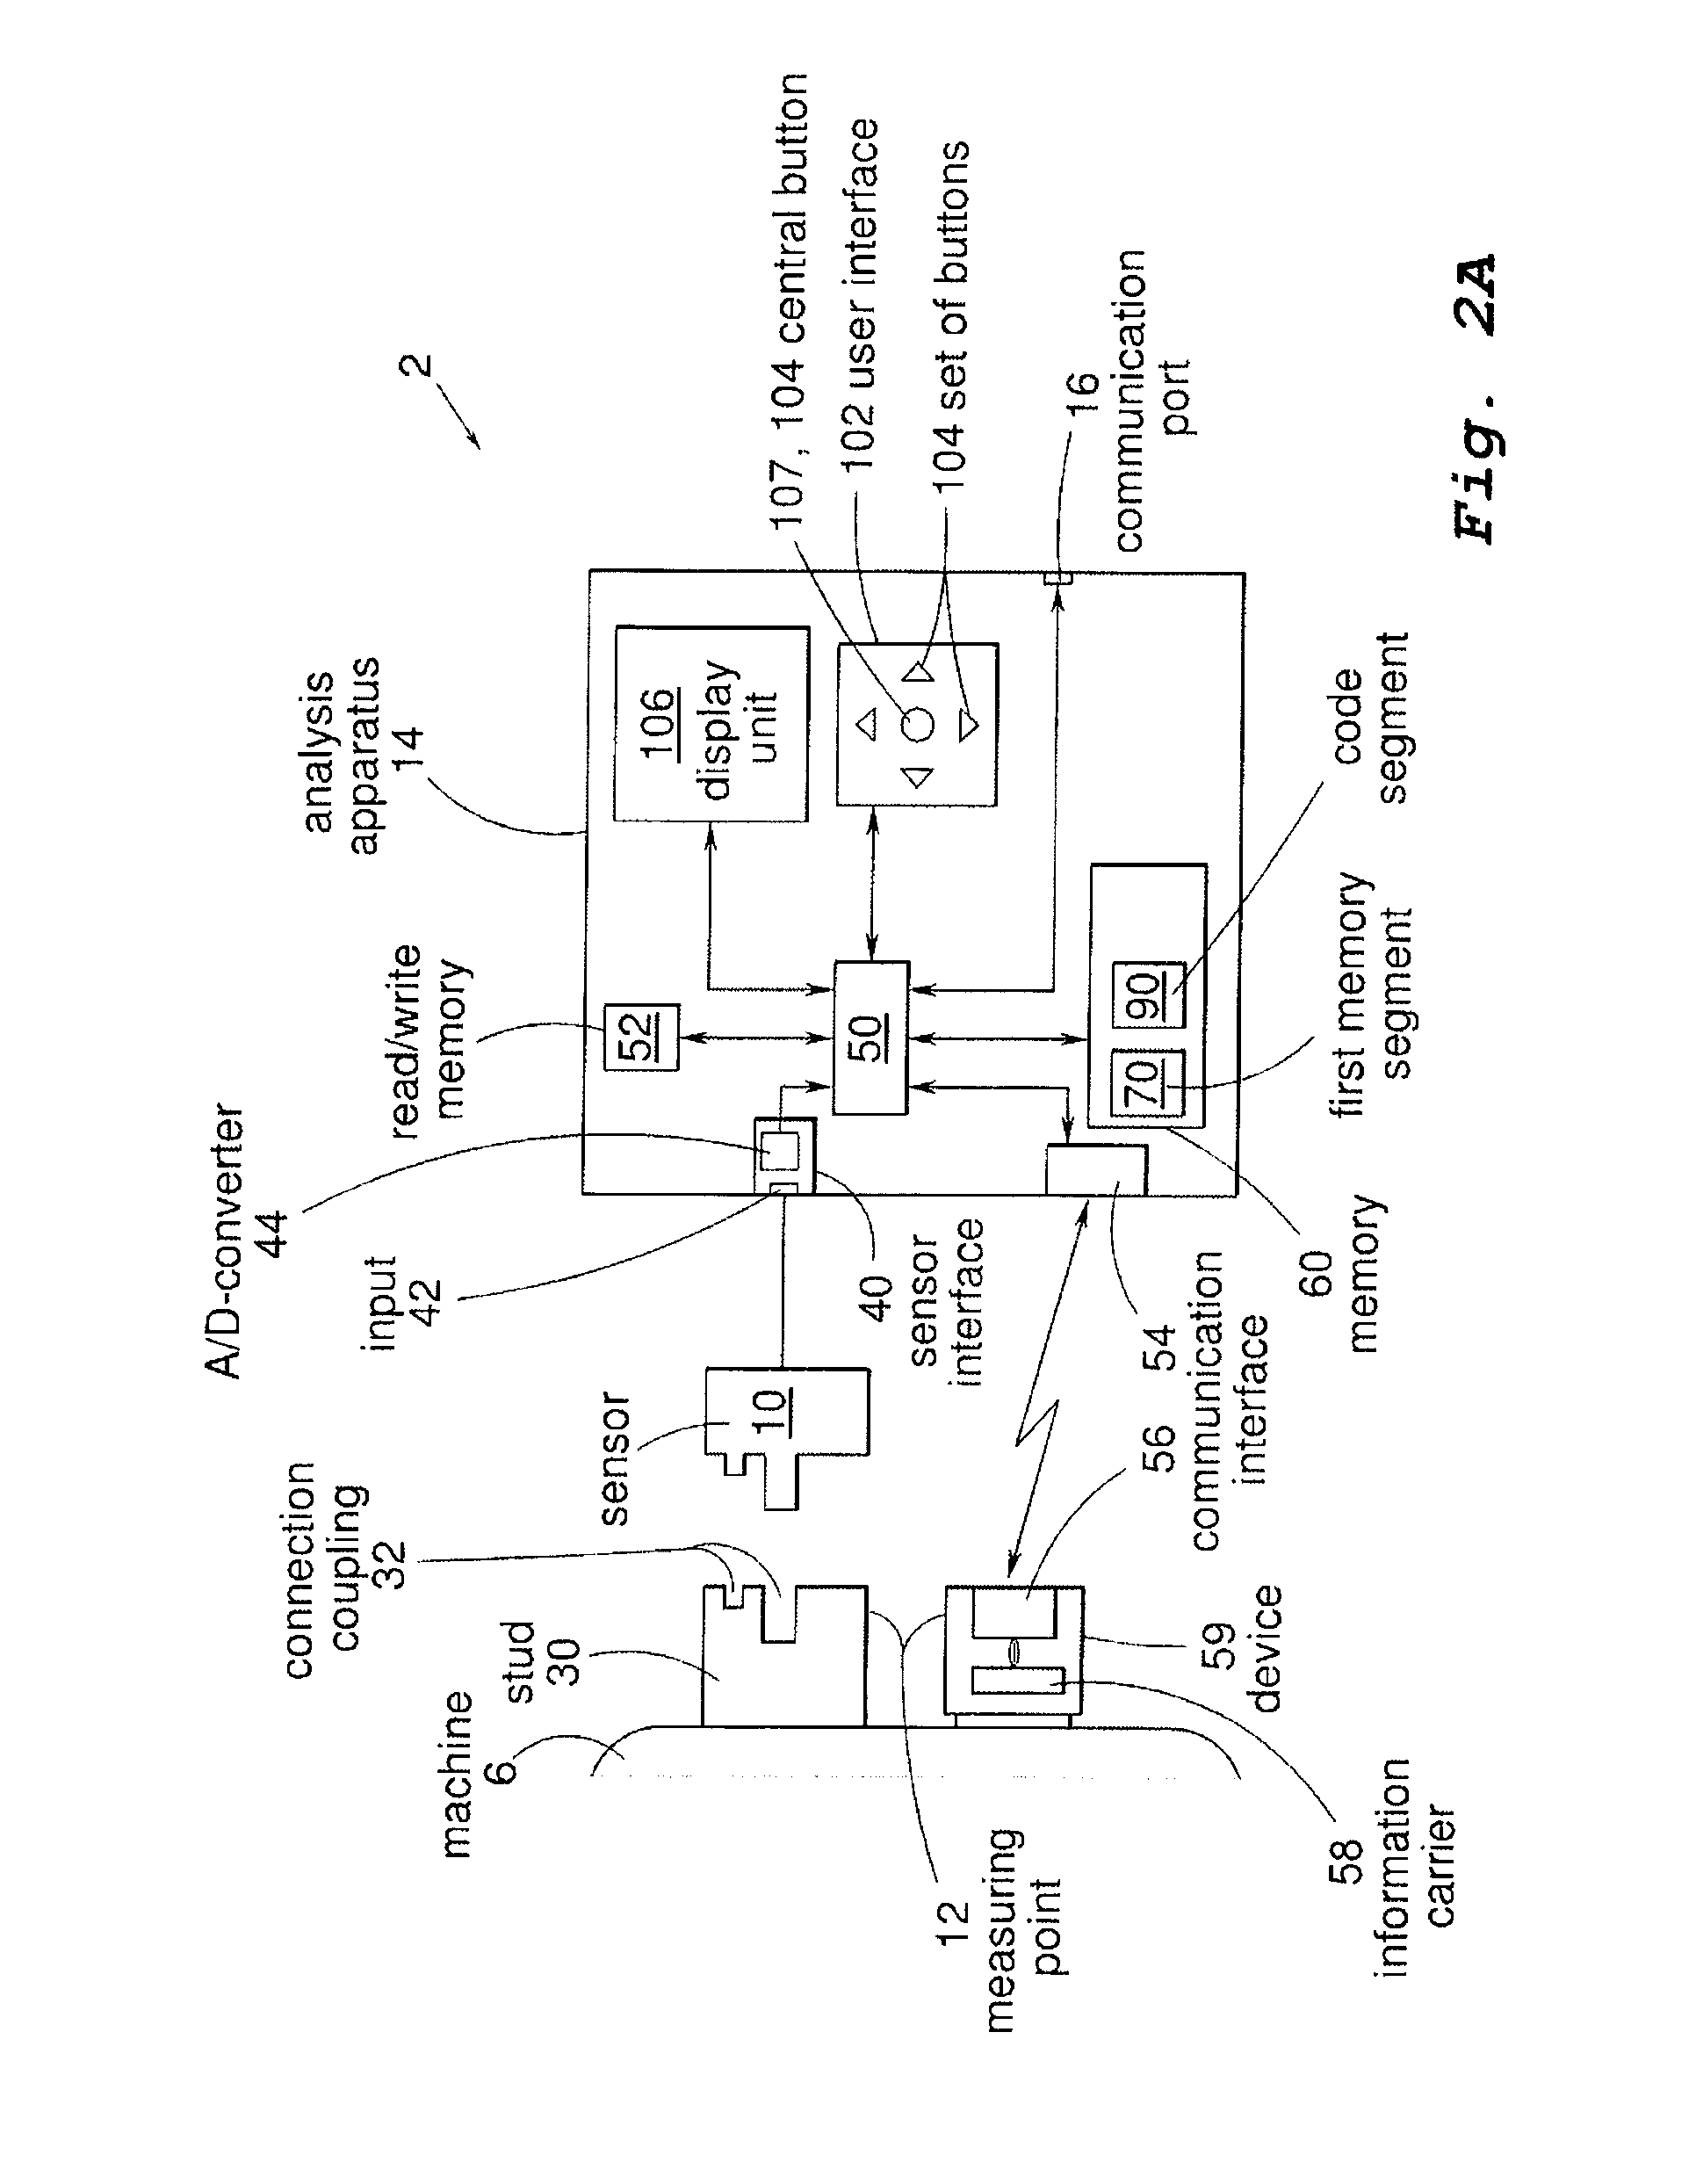 Apparatus for analysing the condition of a machine having a rotating part